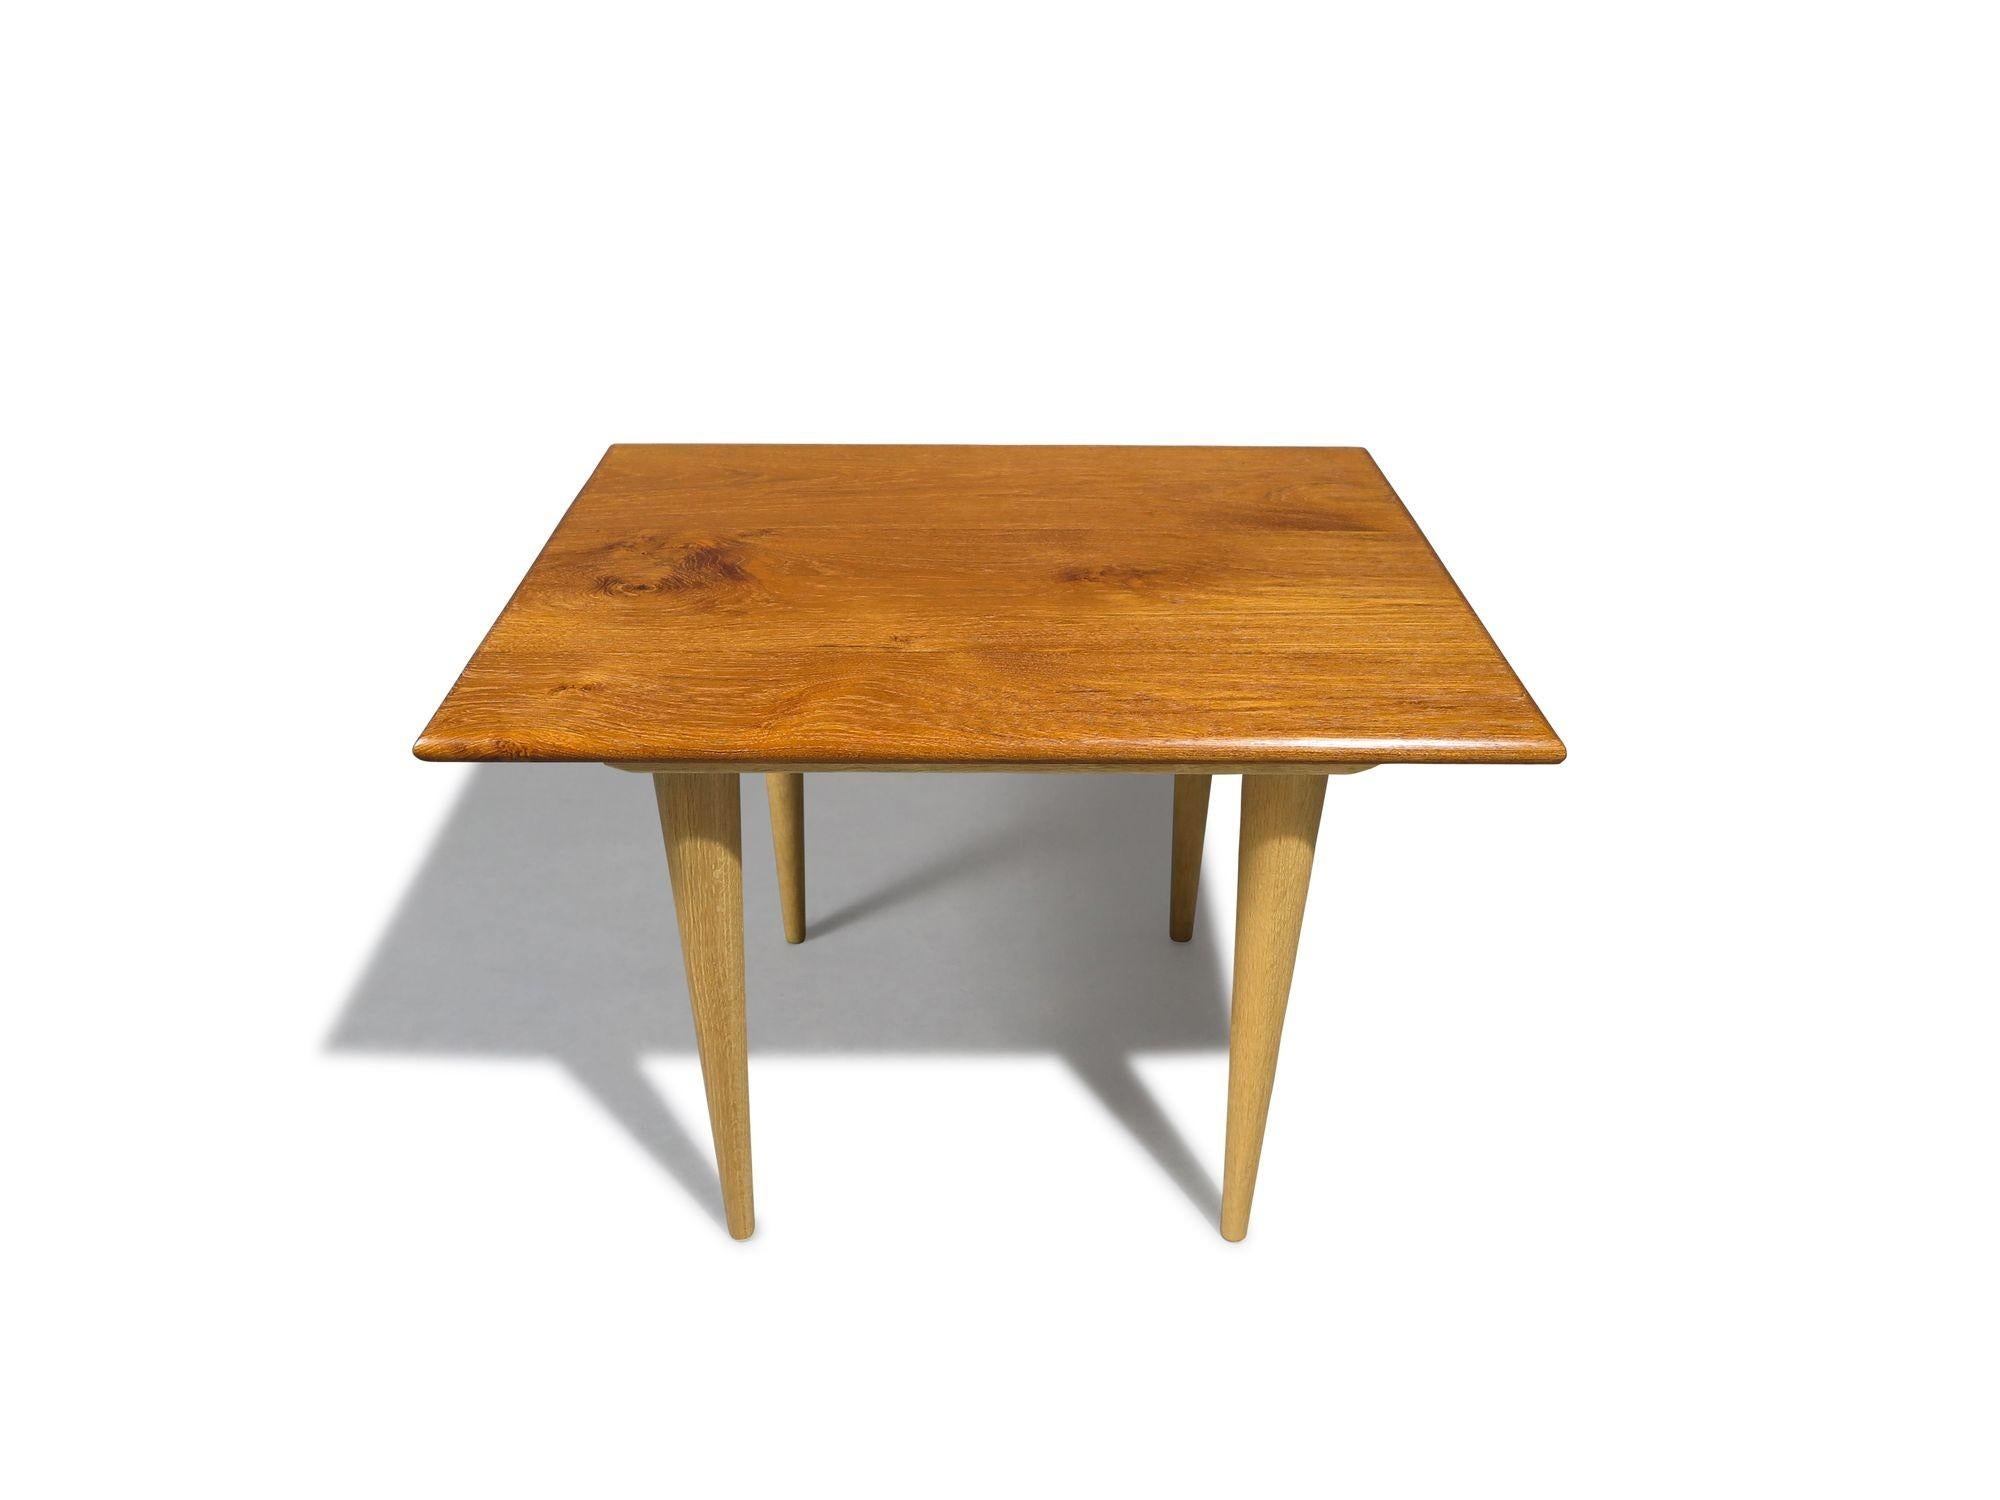 Finely crafted side tables of solid old-growth teak with bullnose edge and raised on white oak legs. The tables are high-quality, sturdy, and finished in a natural oil and wax to highlight the natural wood tones. Excellent condition.
Measurements
W